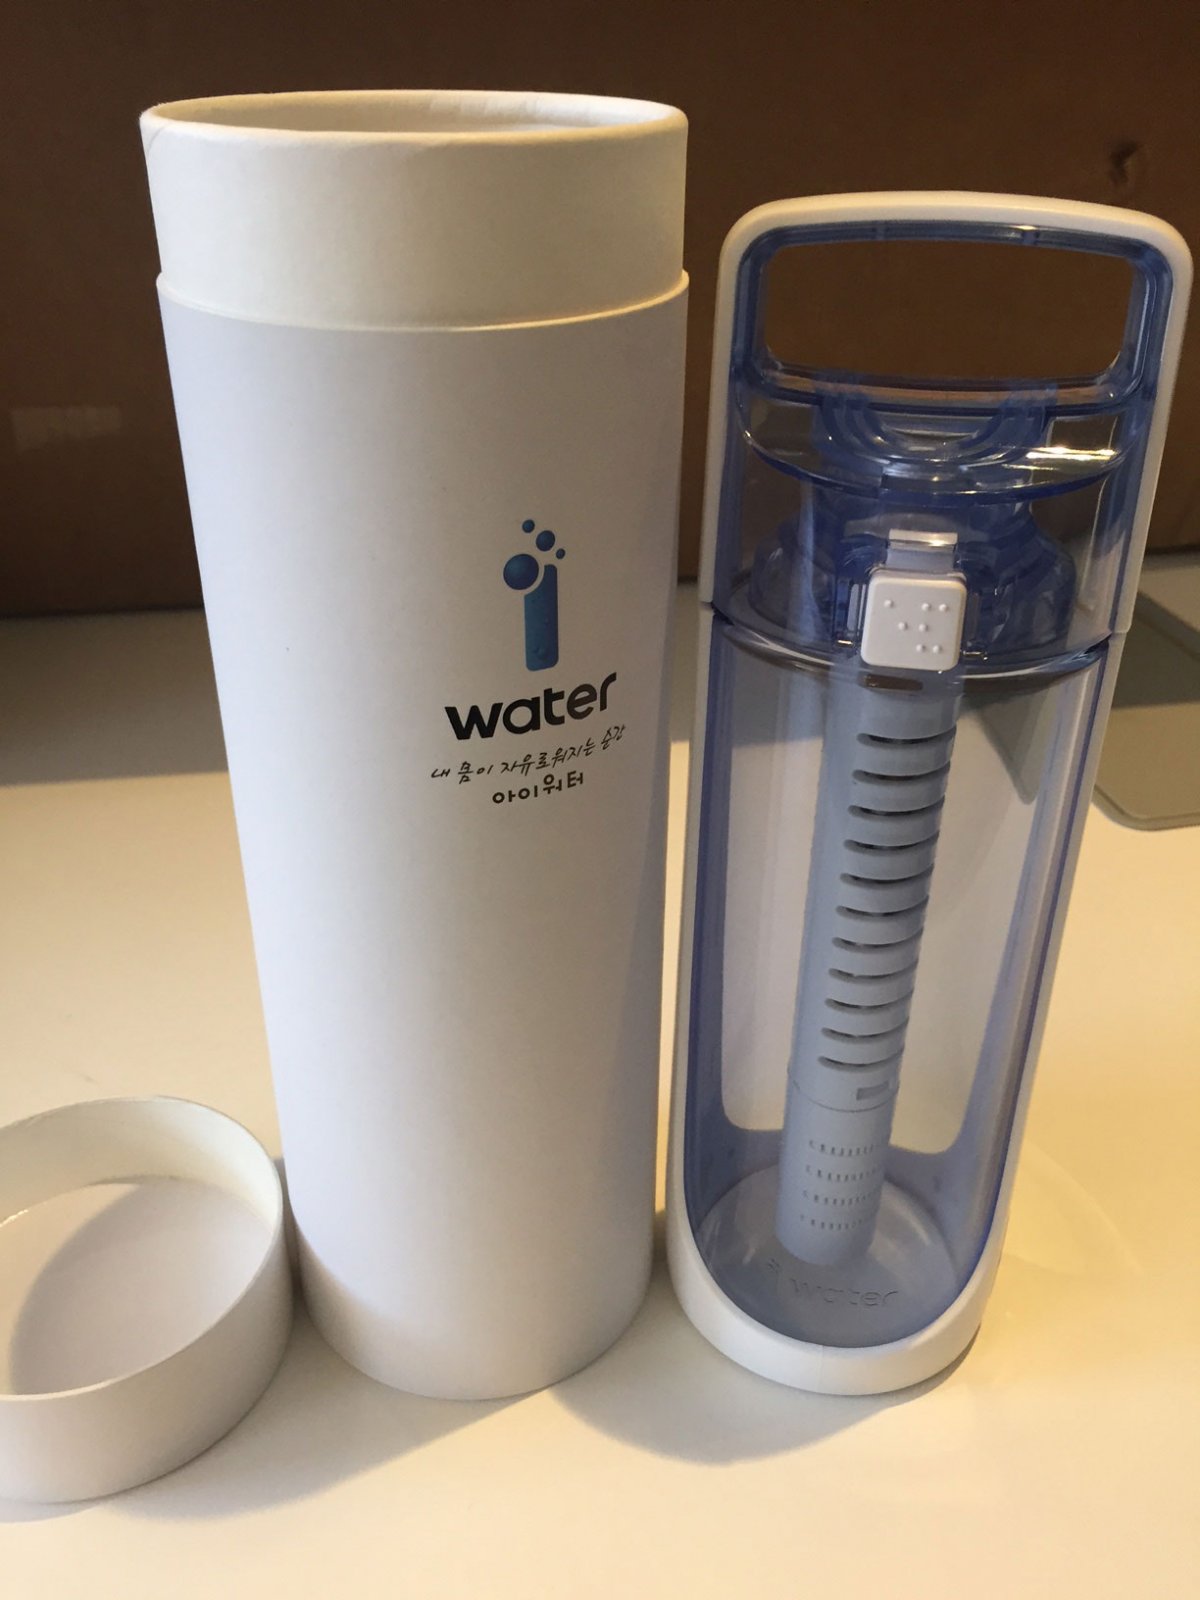 but-you-also-get-the-futuristic-i-water-bottle-from-korea-which-is-launching-in-the-us-this-spring